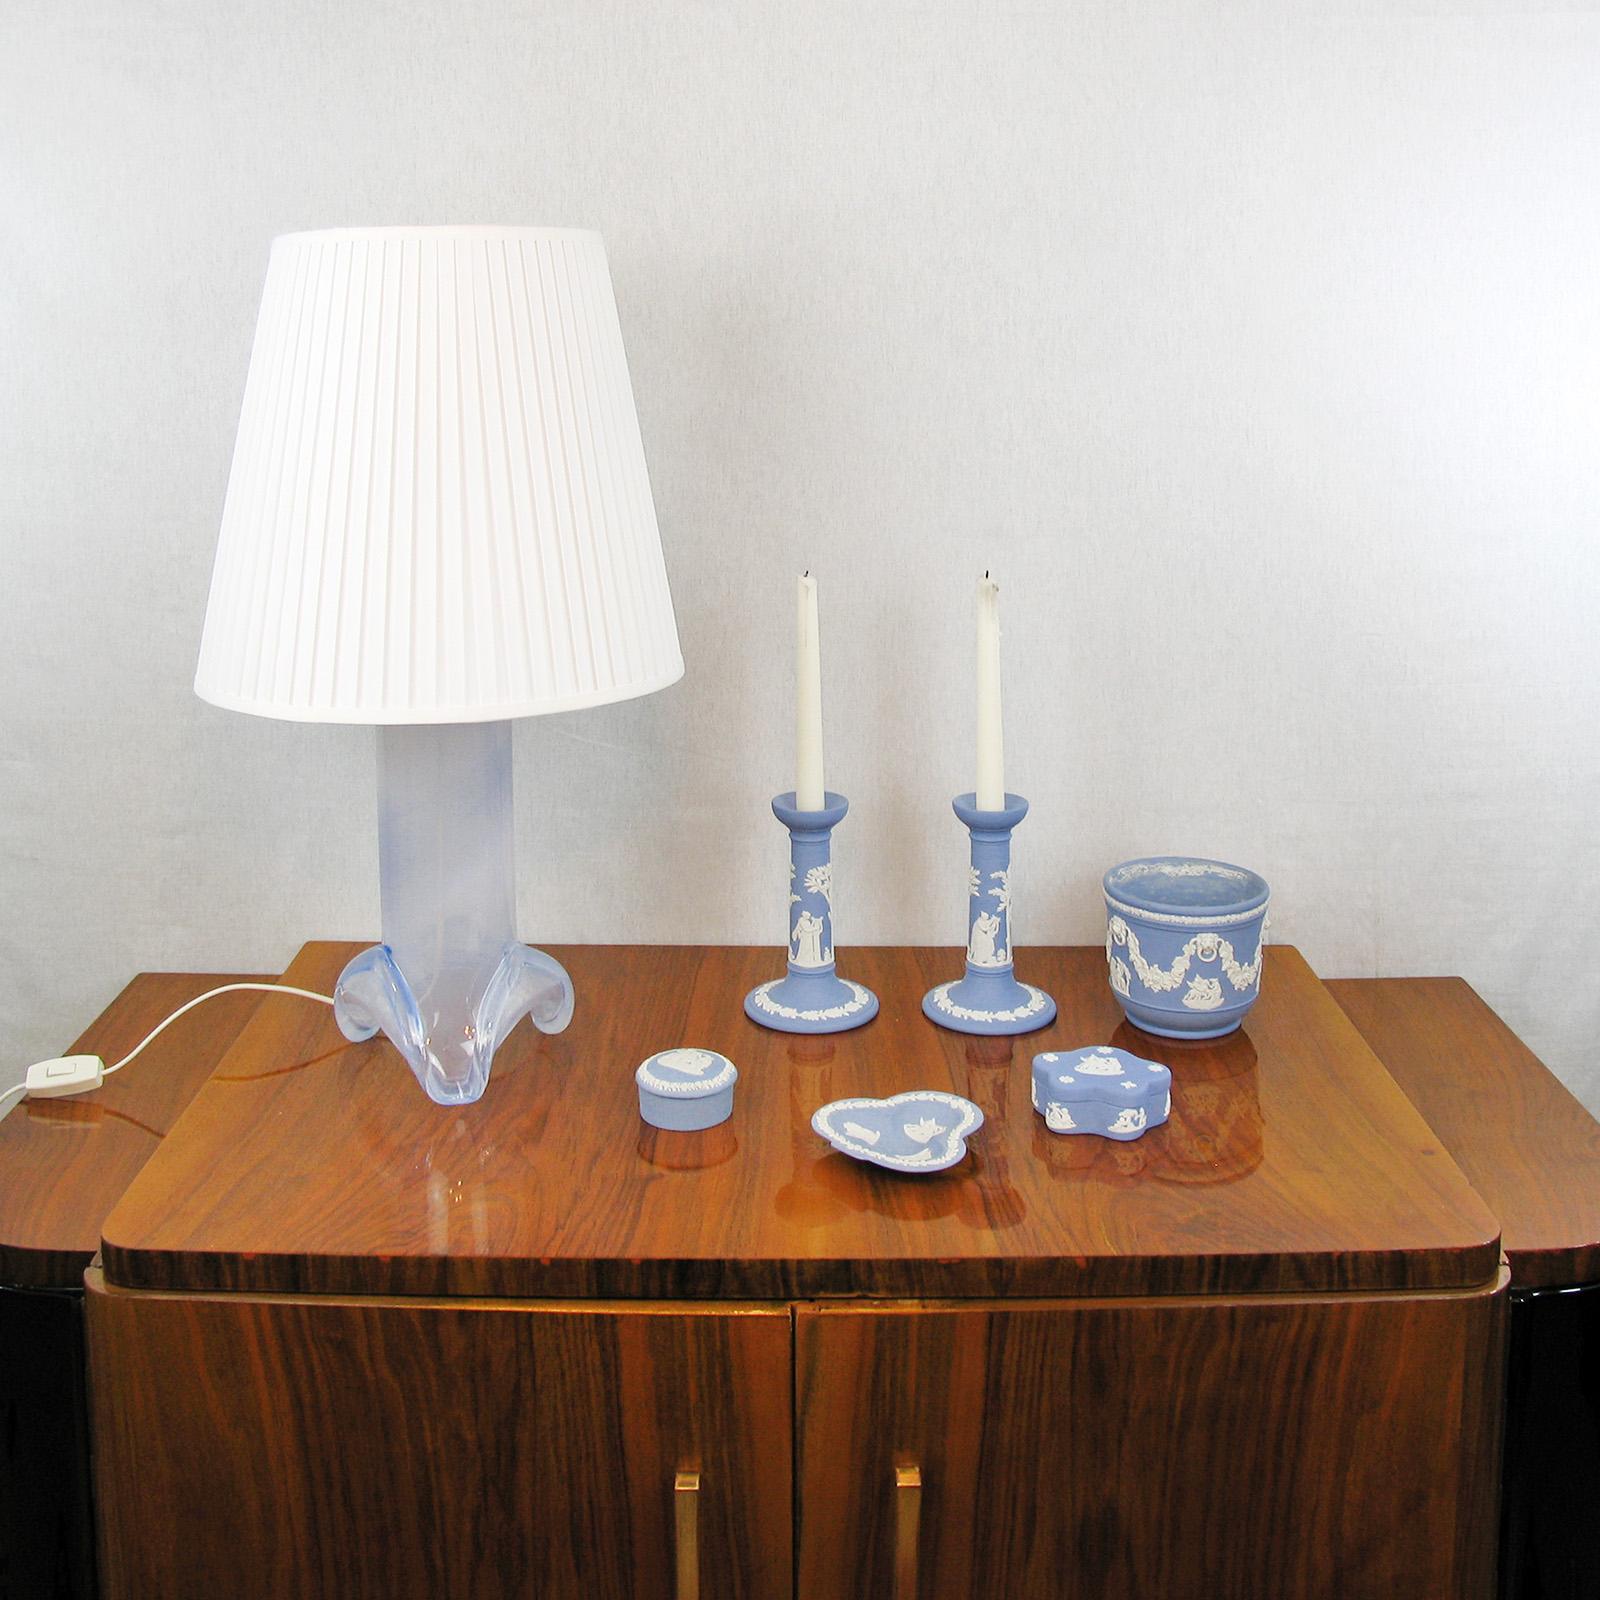 Table lamp designed by Hannelore Dreutler for Studio Ahus and Ateljé Lyktan. The milky blue glass base holds a brass socket. Original maker's label, signed and dated 